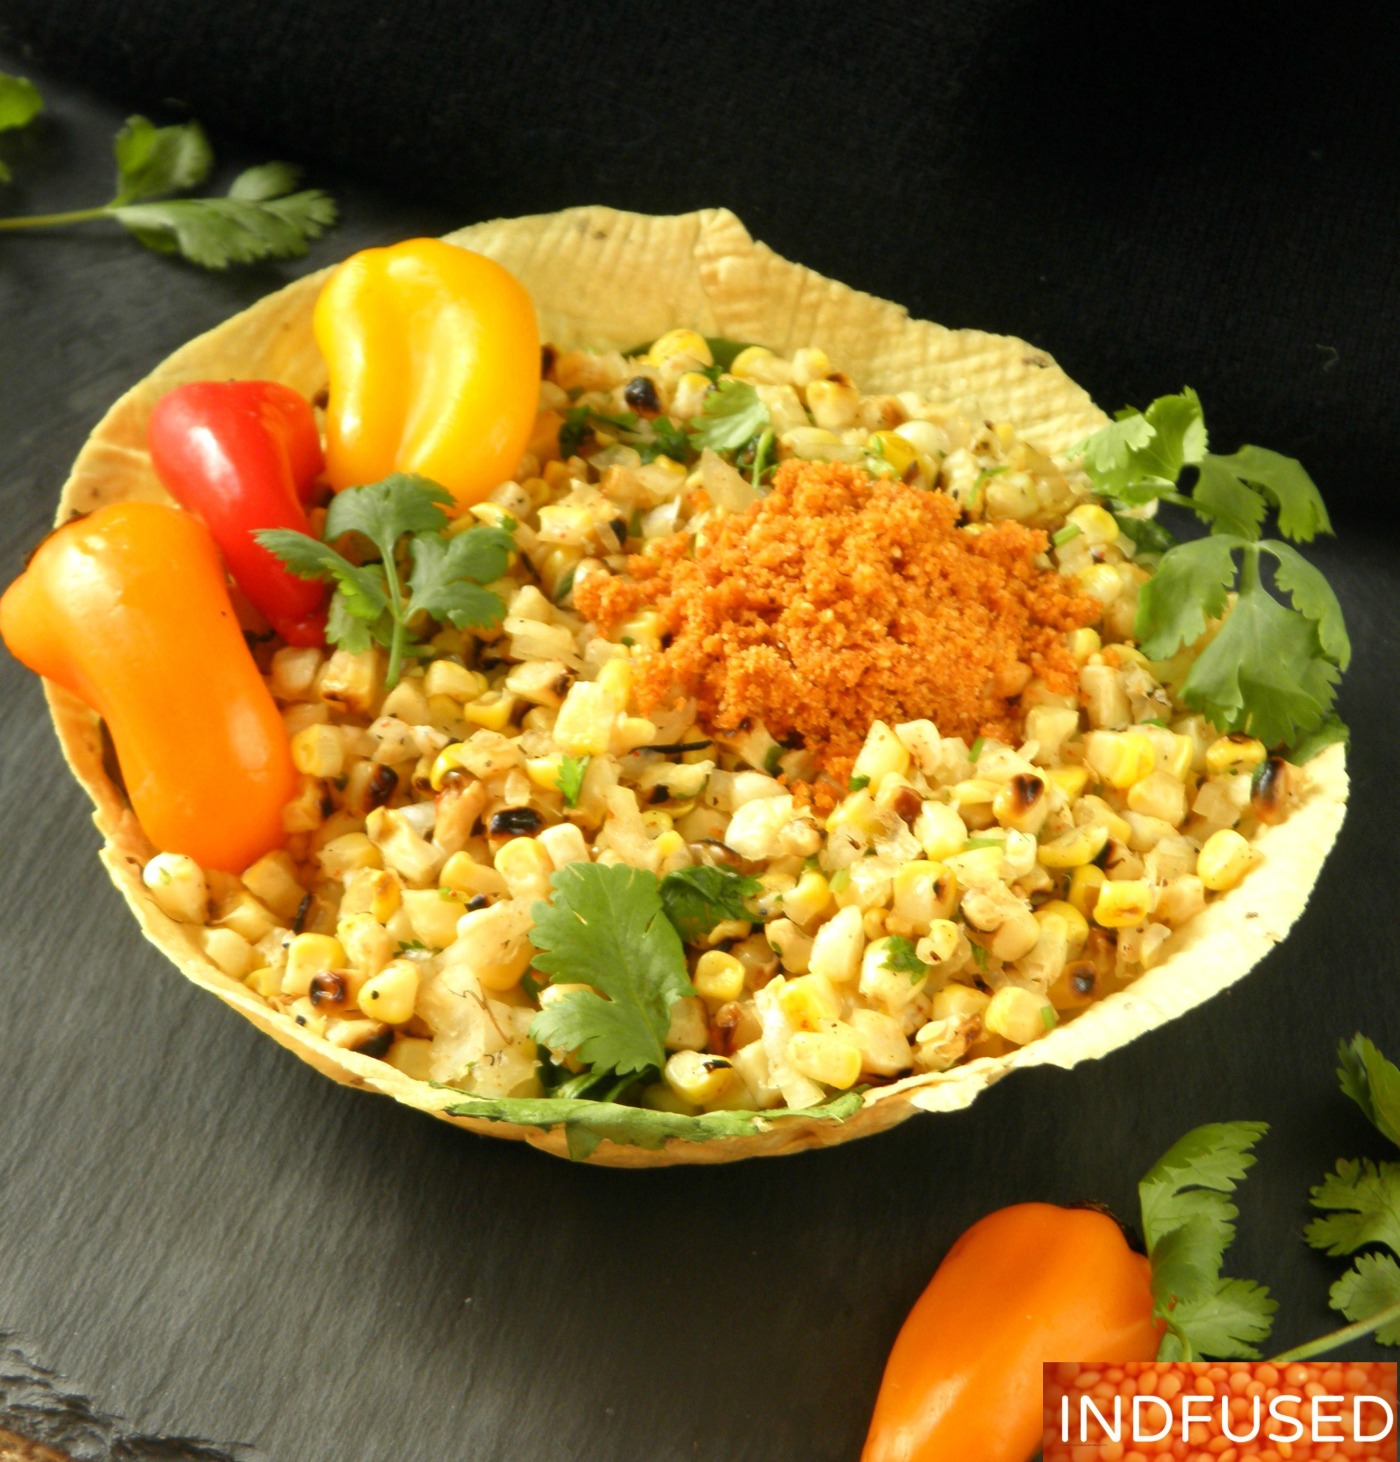 India's favorite street corn served hurda style with red chutney in an edible papad bowl!